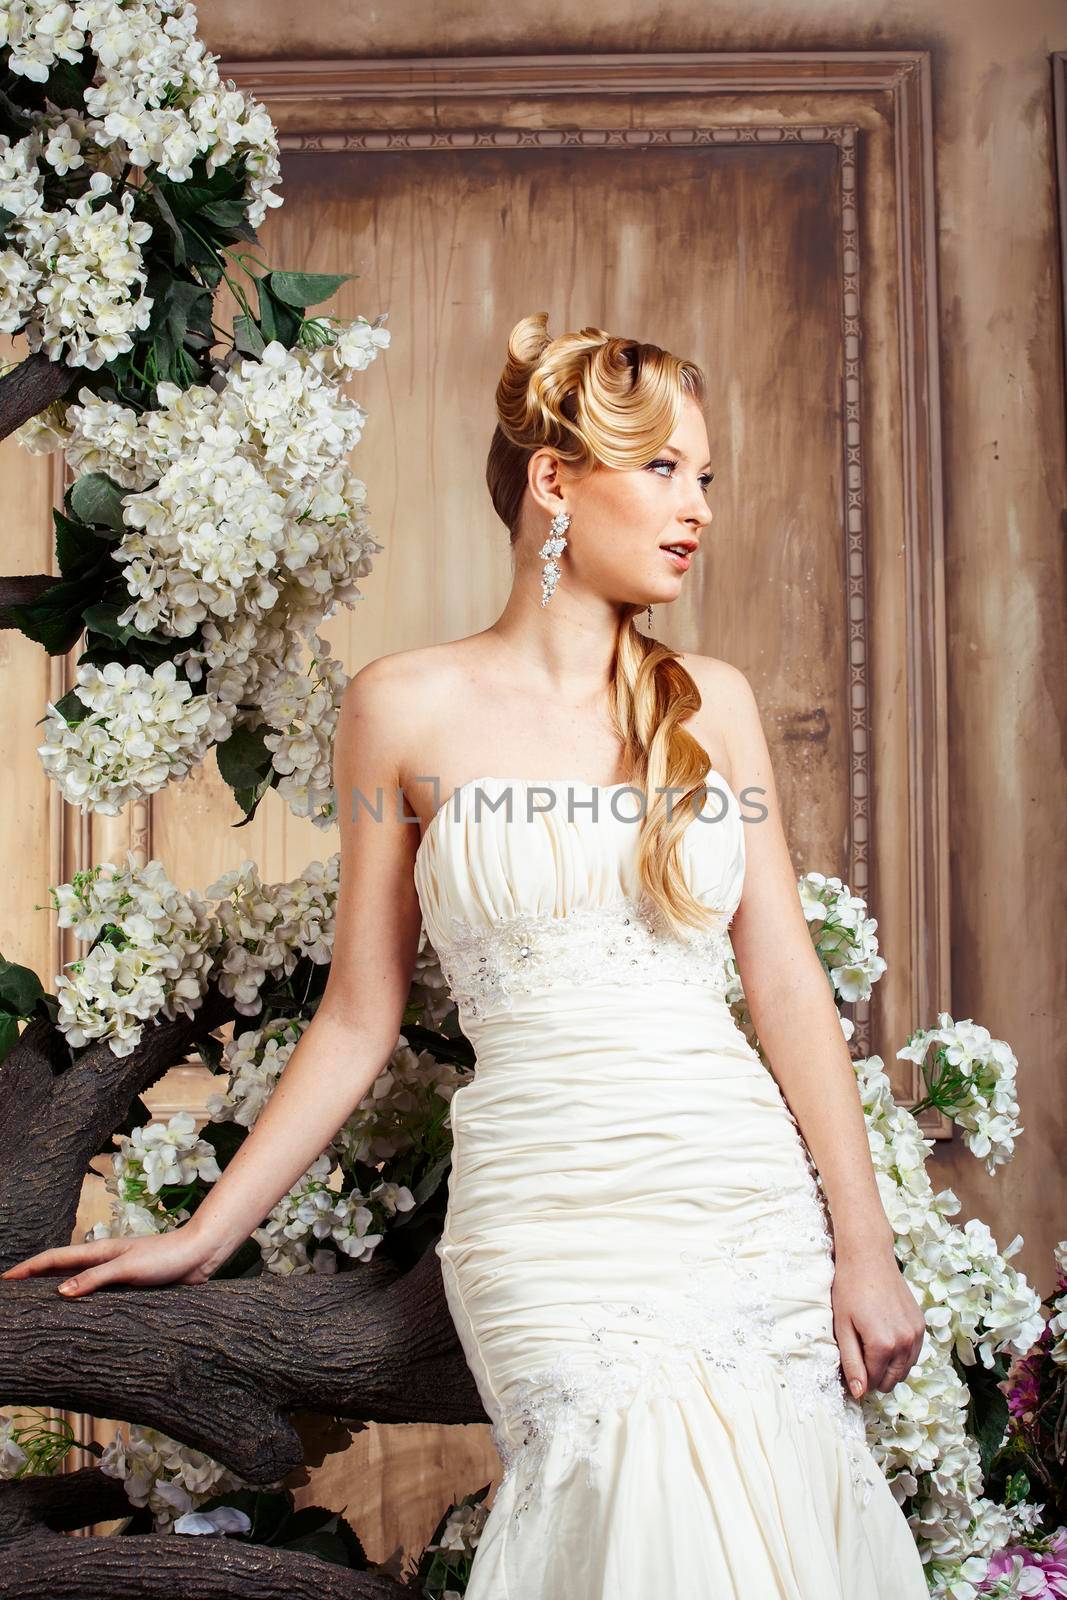 beauty young bride alone in luxury vintage interior with a lot of flowers, makeup and creative hairstyle by JordanJ